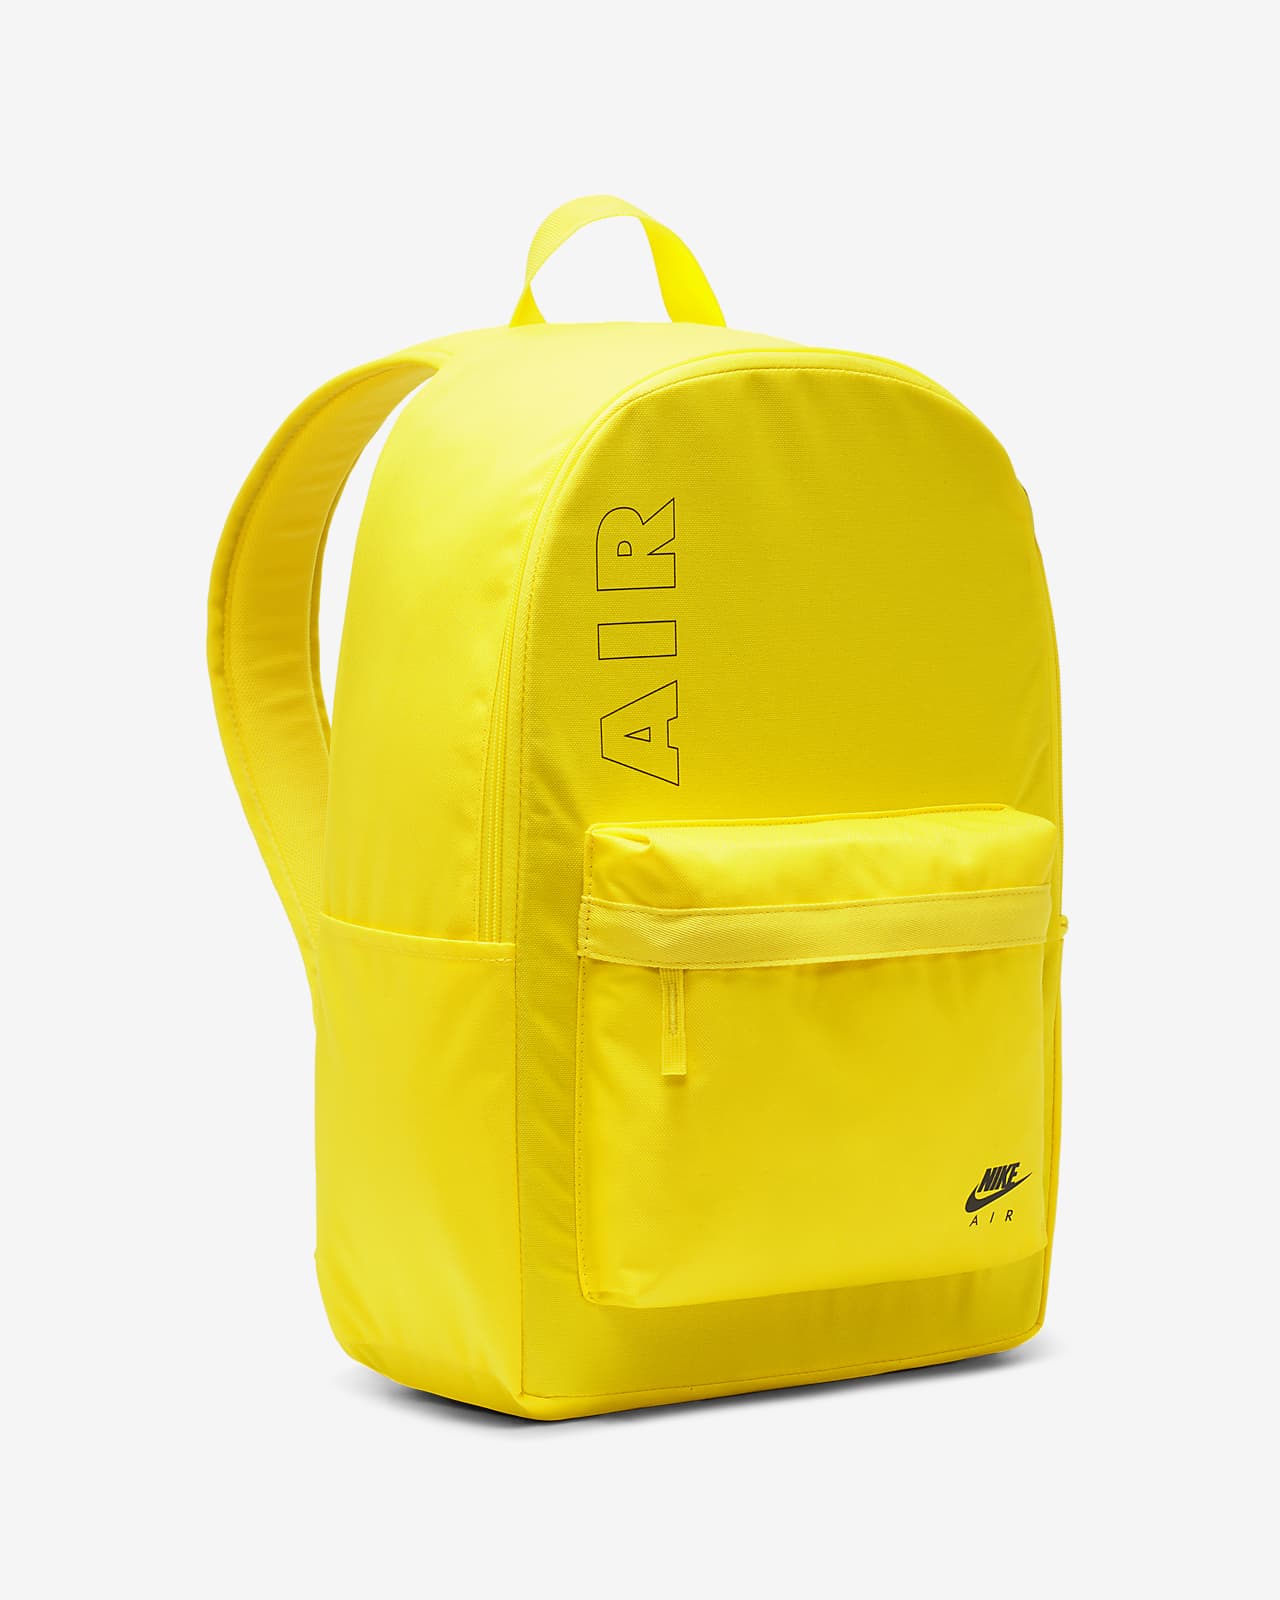 nike air heritage 2.0 graphic backpack